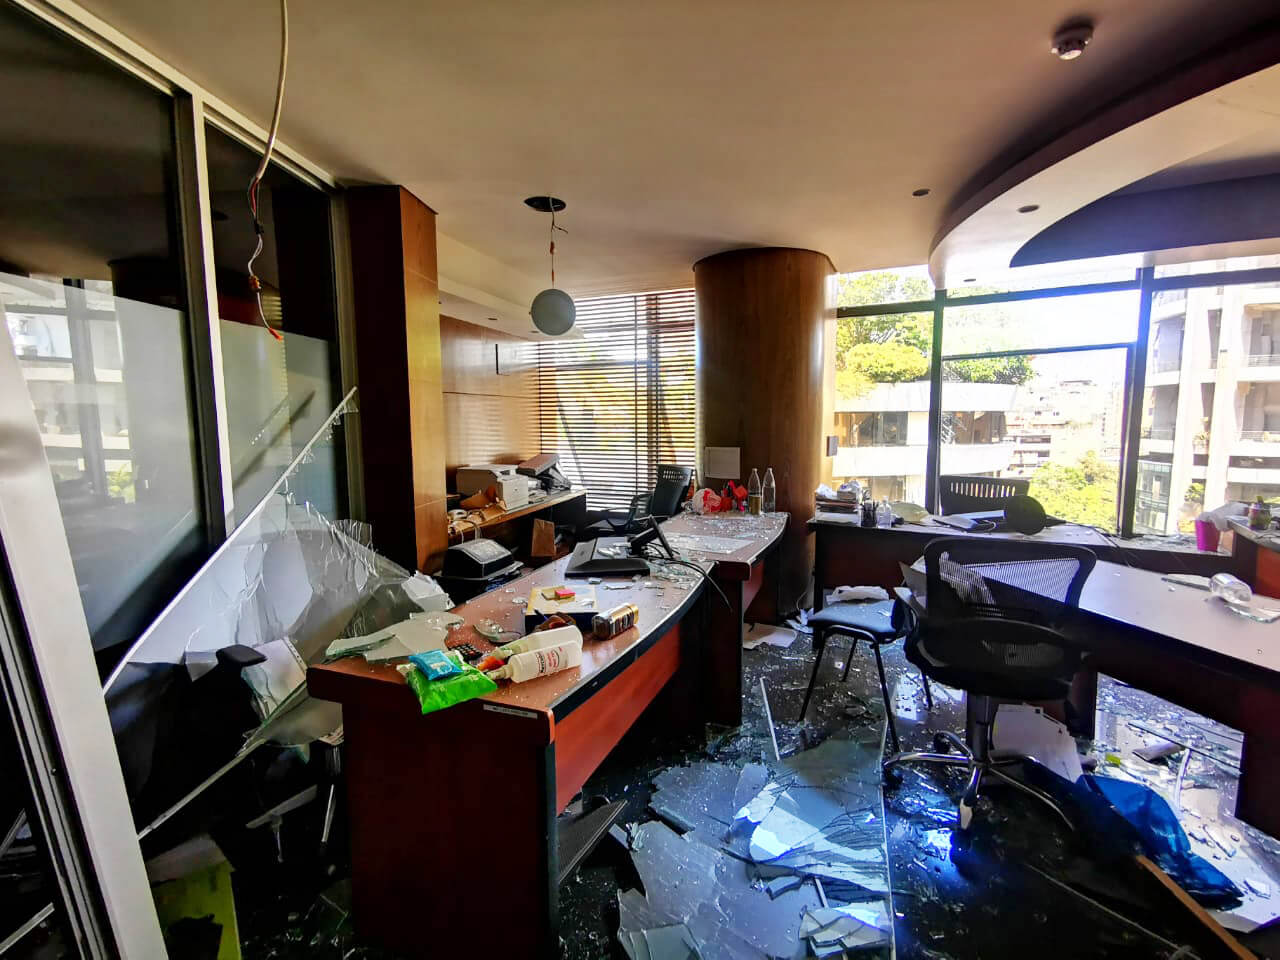 International Medical Corps' office following the explosion.